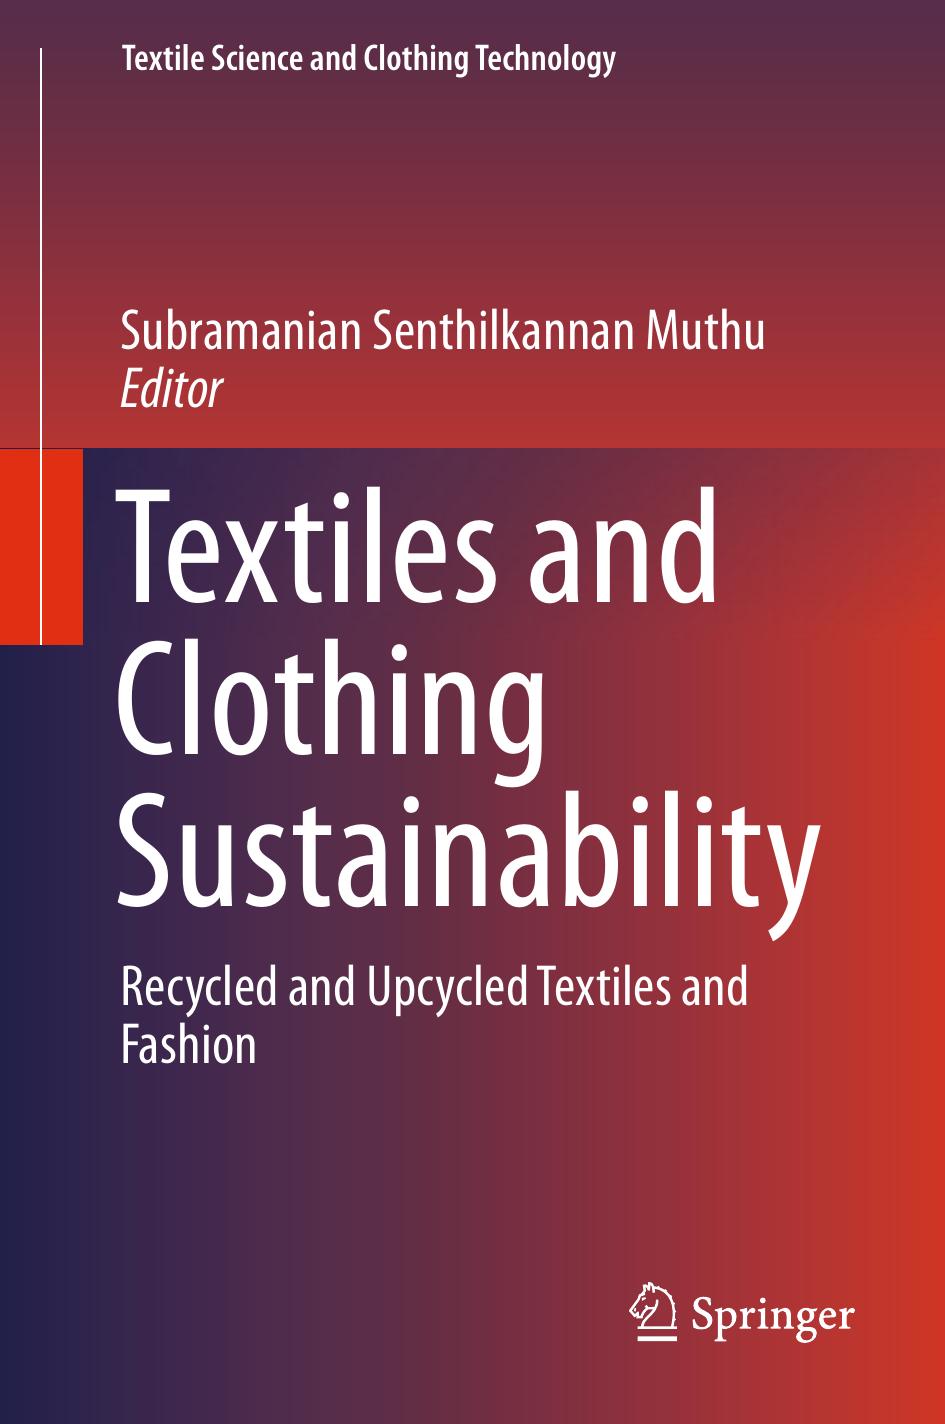 Textile Science and Clothing Technology 2017